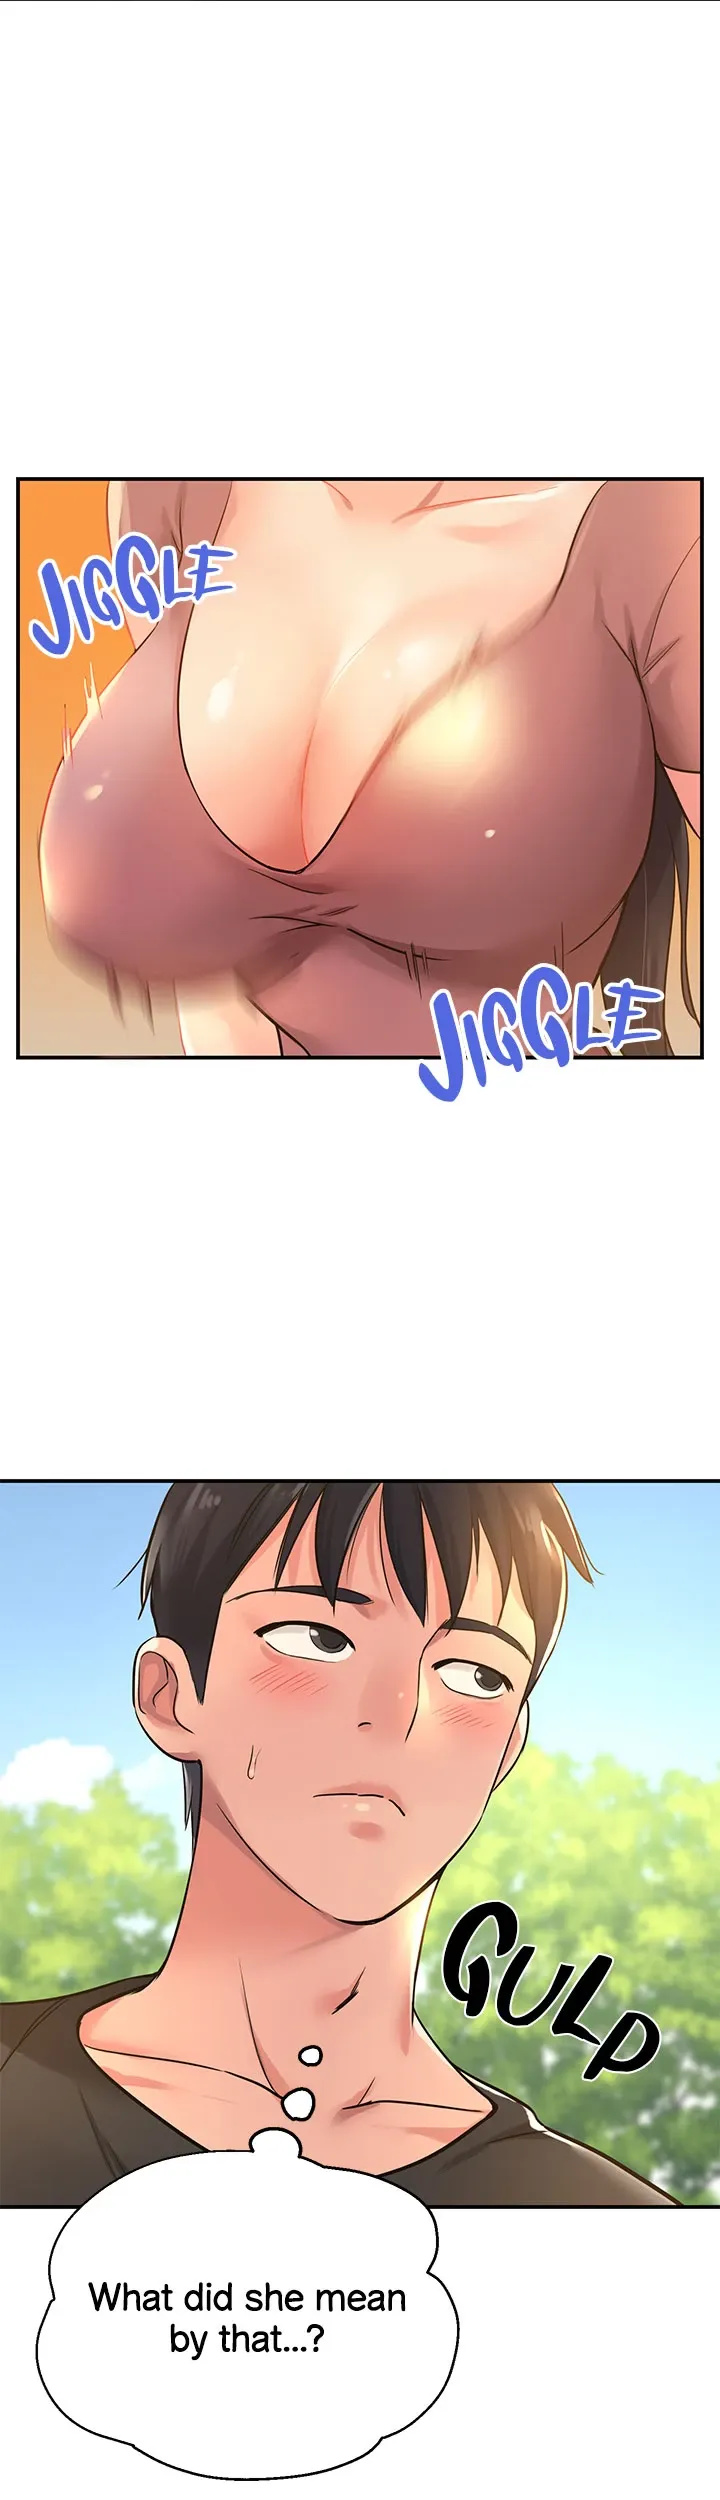 Read manhwa The Hole is Open Chapter 3 - SauceManhwa.com